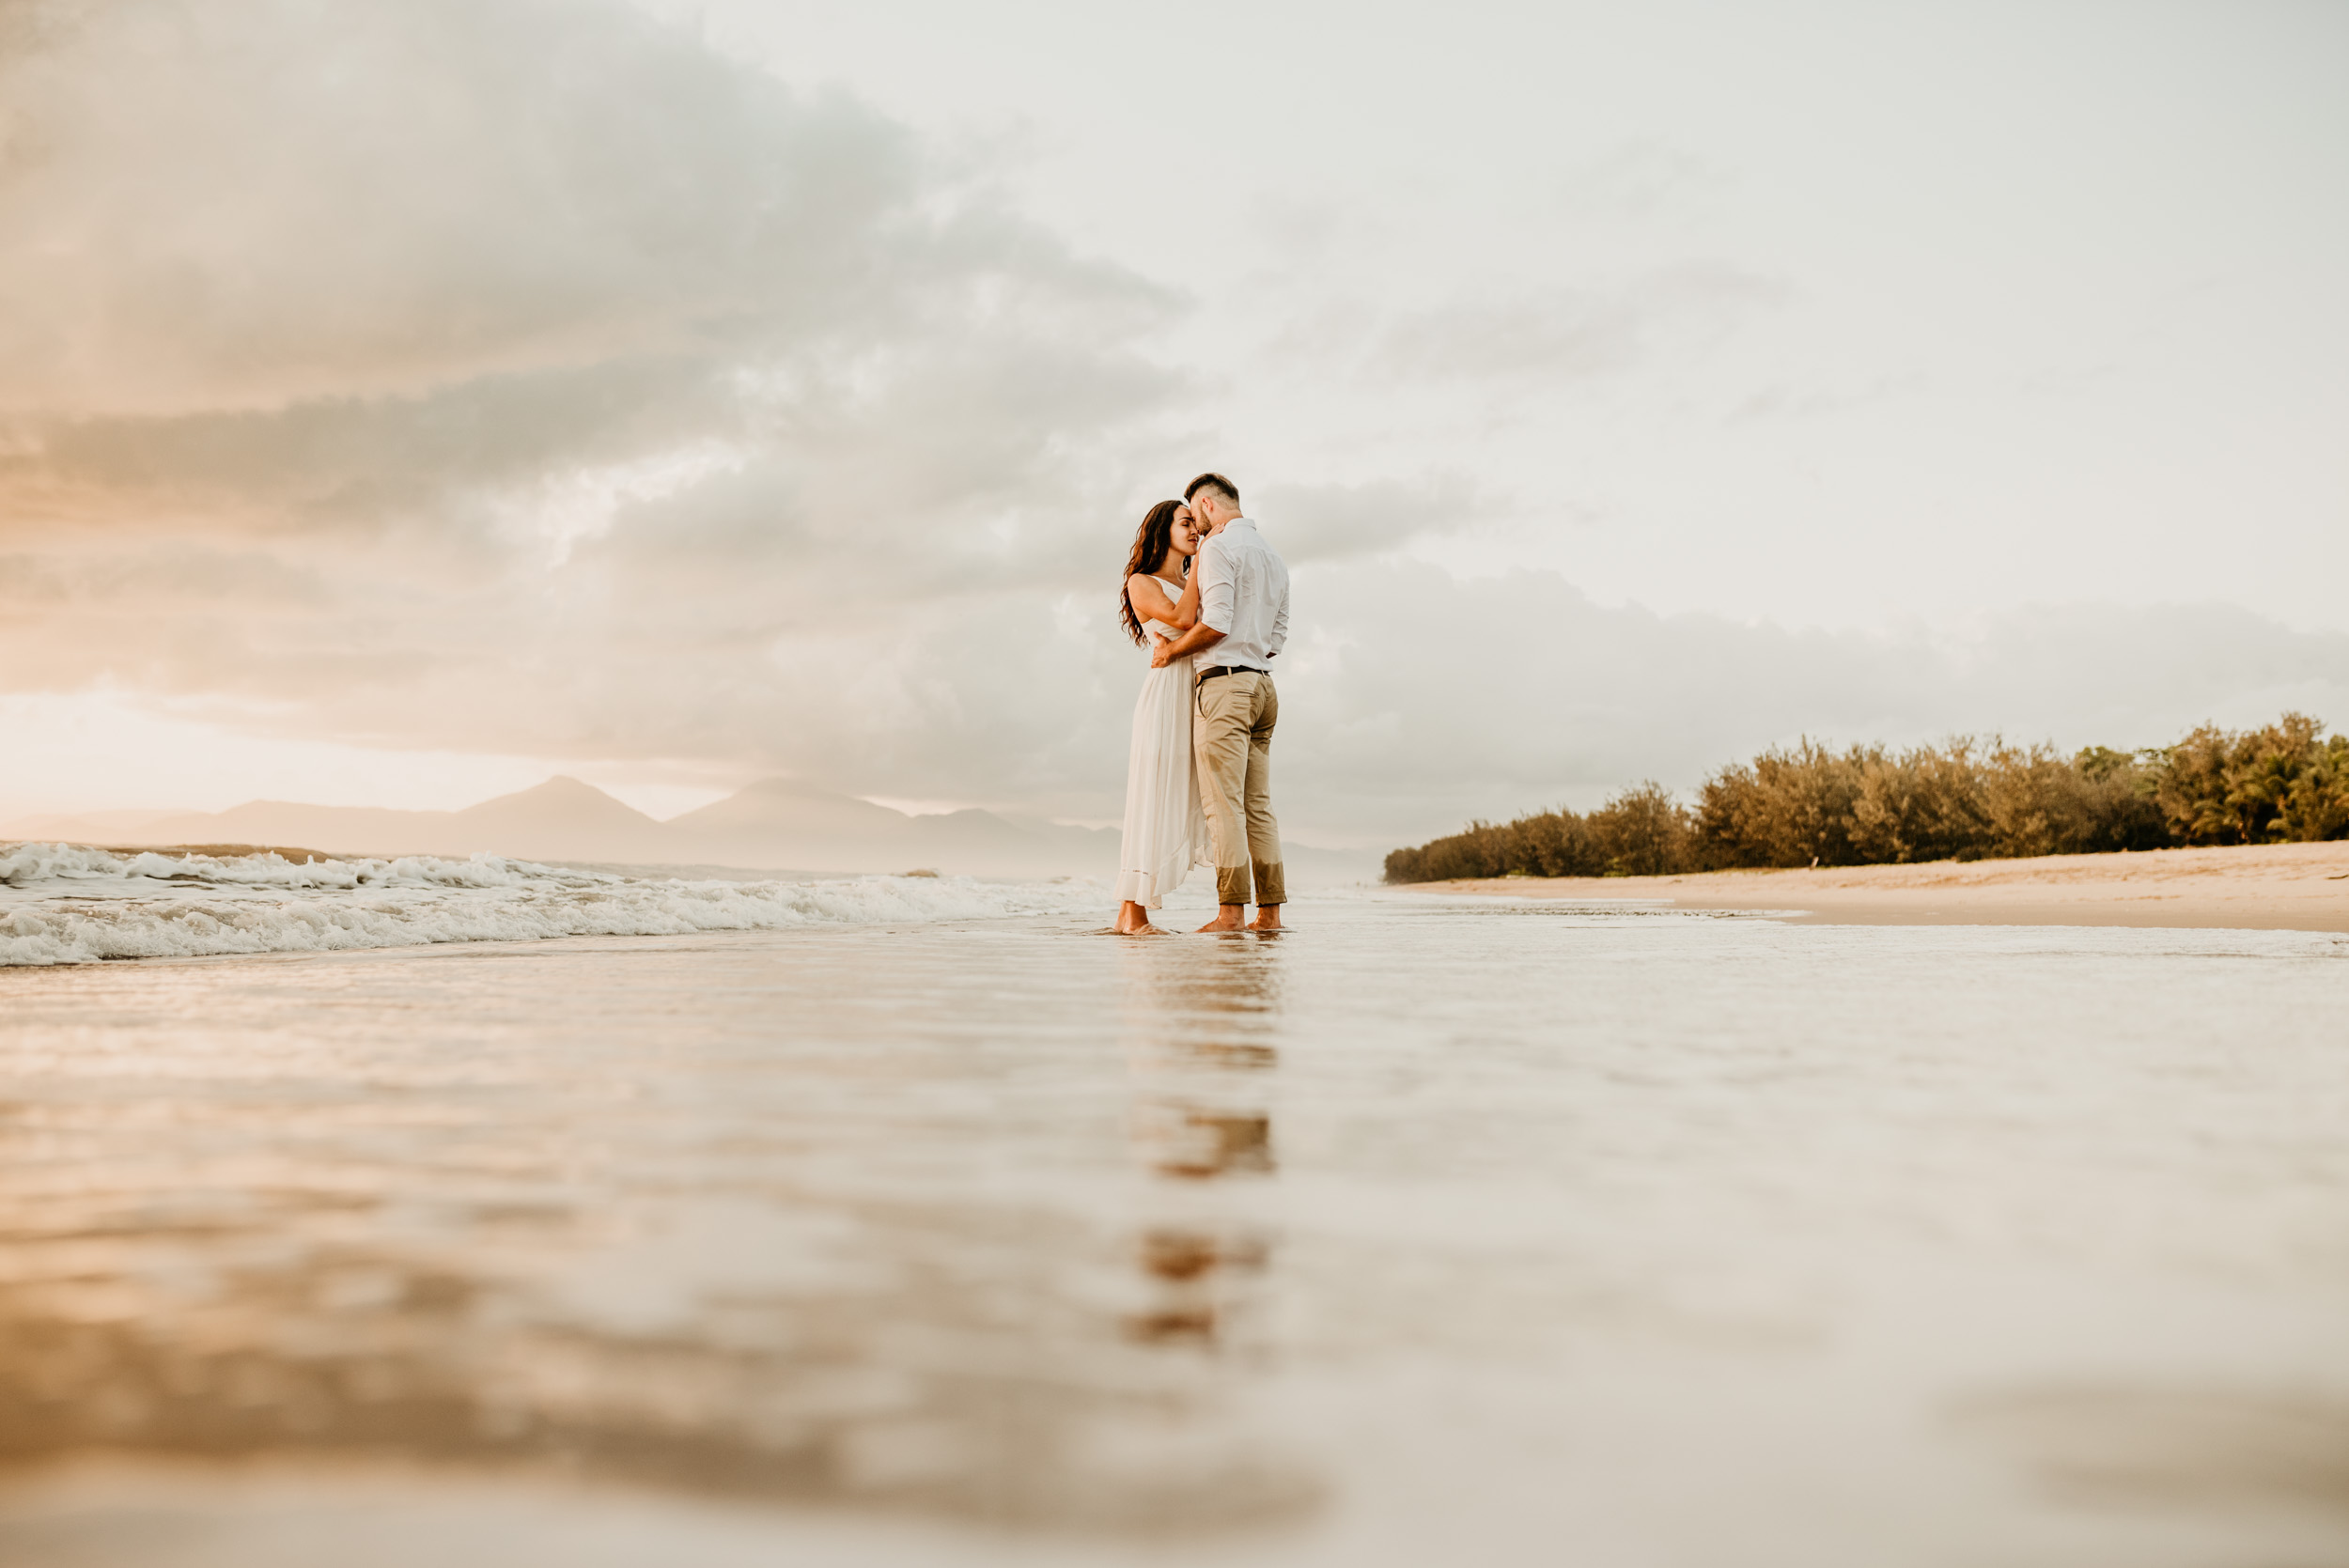 The Raw Photographer - Cairns Wedding Photographer - Engaged Engagement - Beach location - Candid Photography Queensland-27.jpg